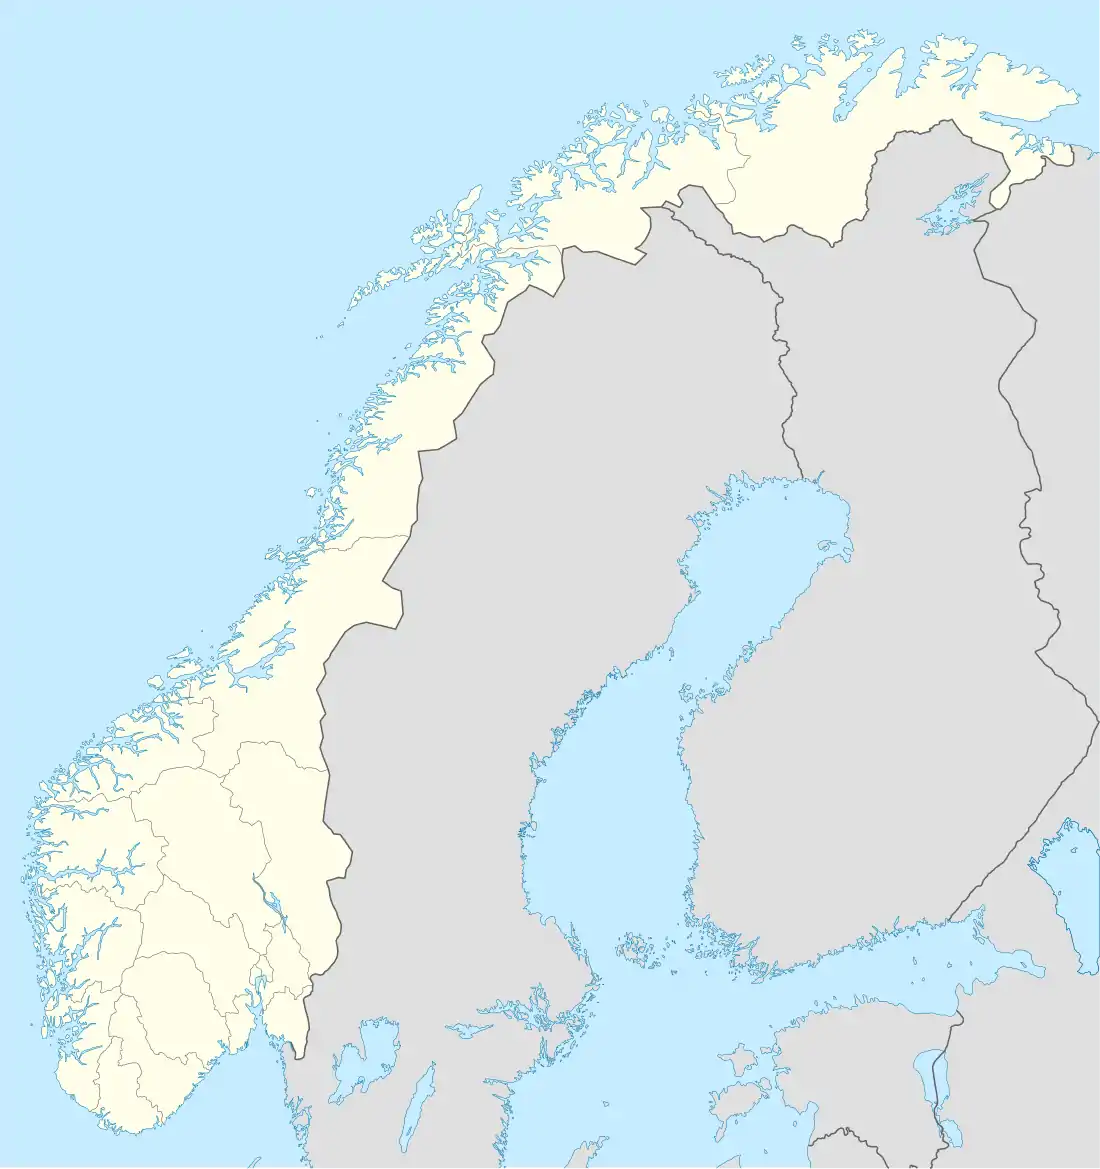 Kleive is located in Norway